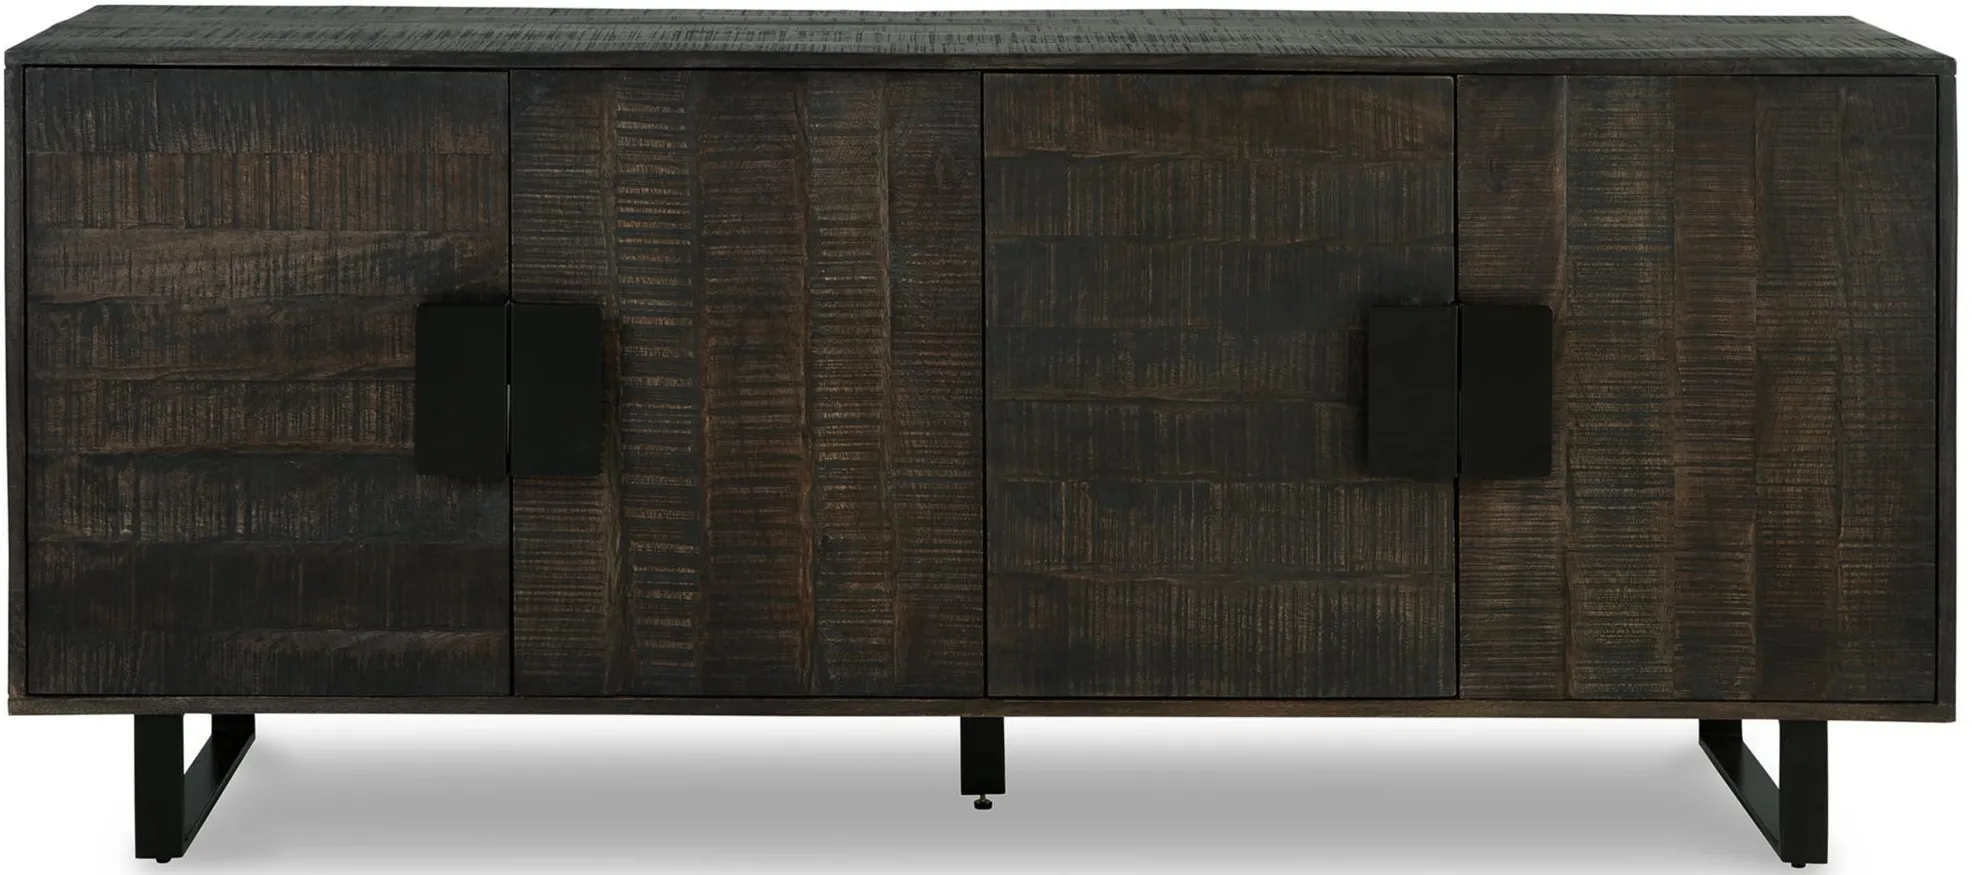 Kevmart Accent Cabinet in Grayish Brown/Black by Ashley Furniture